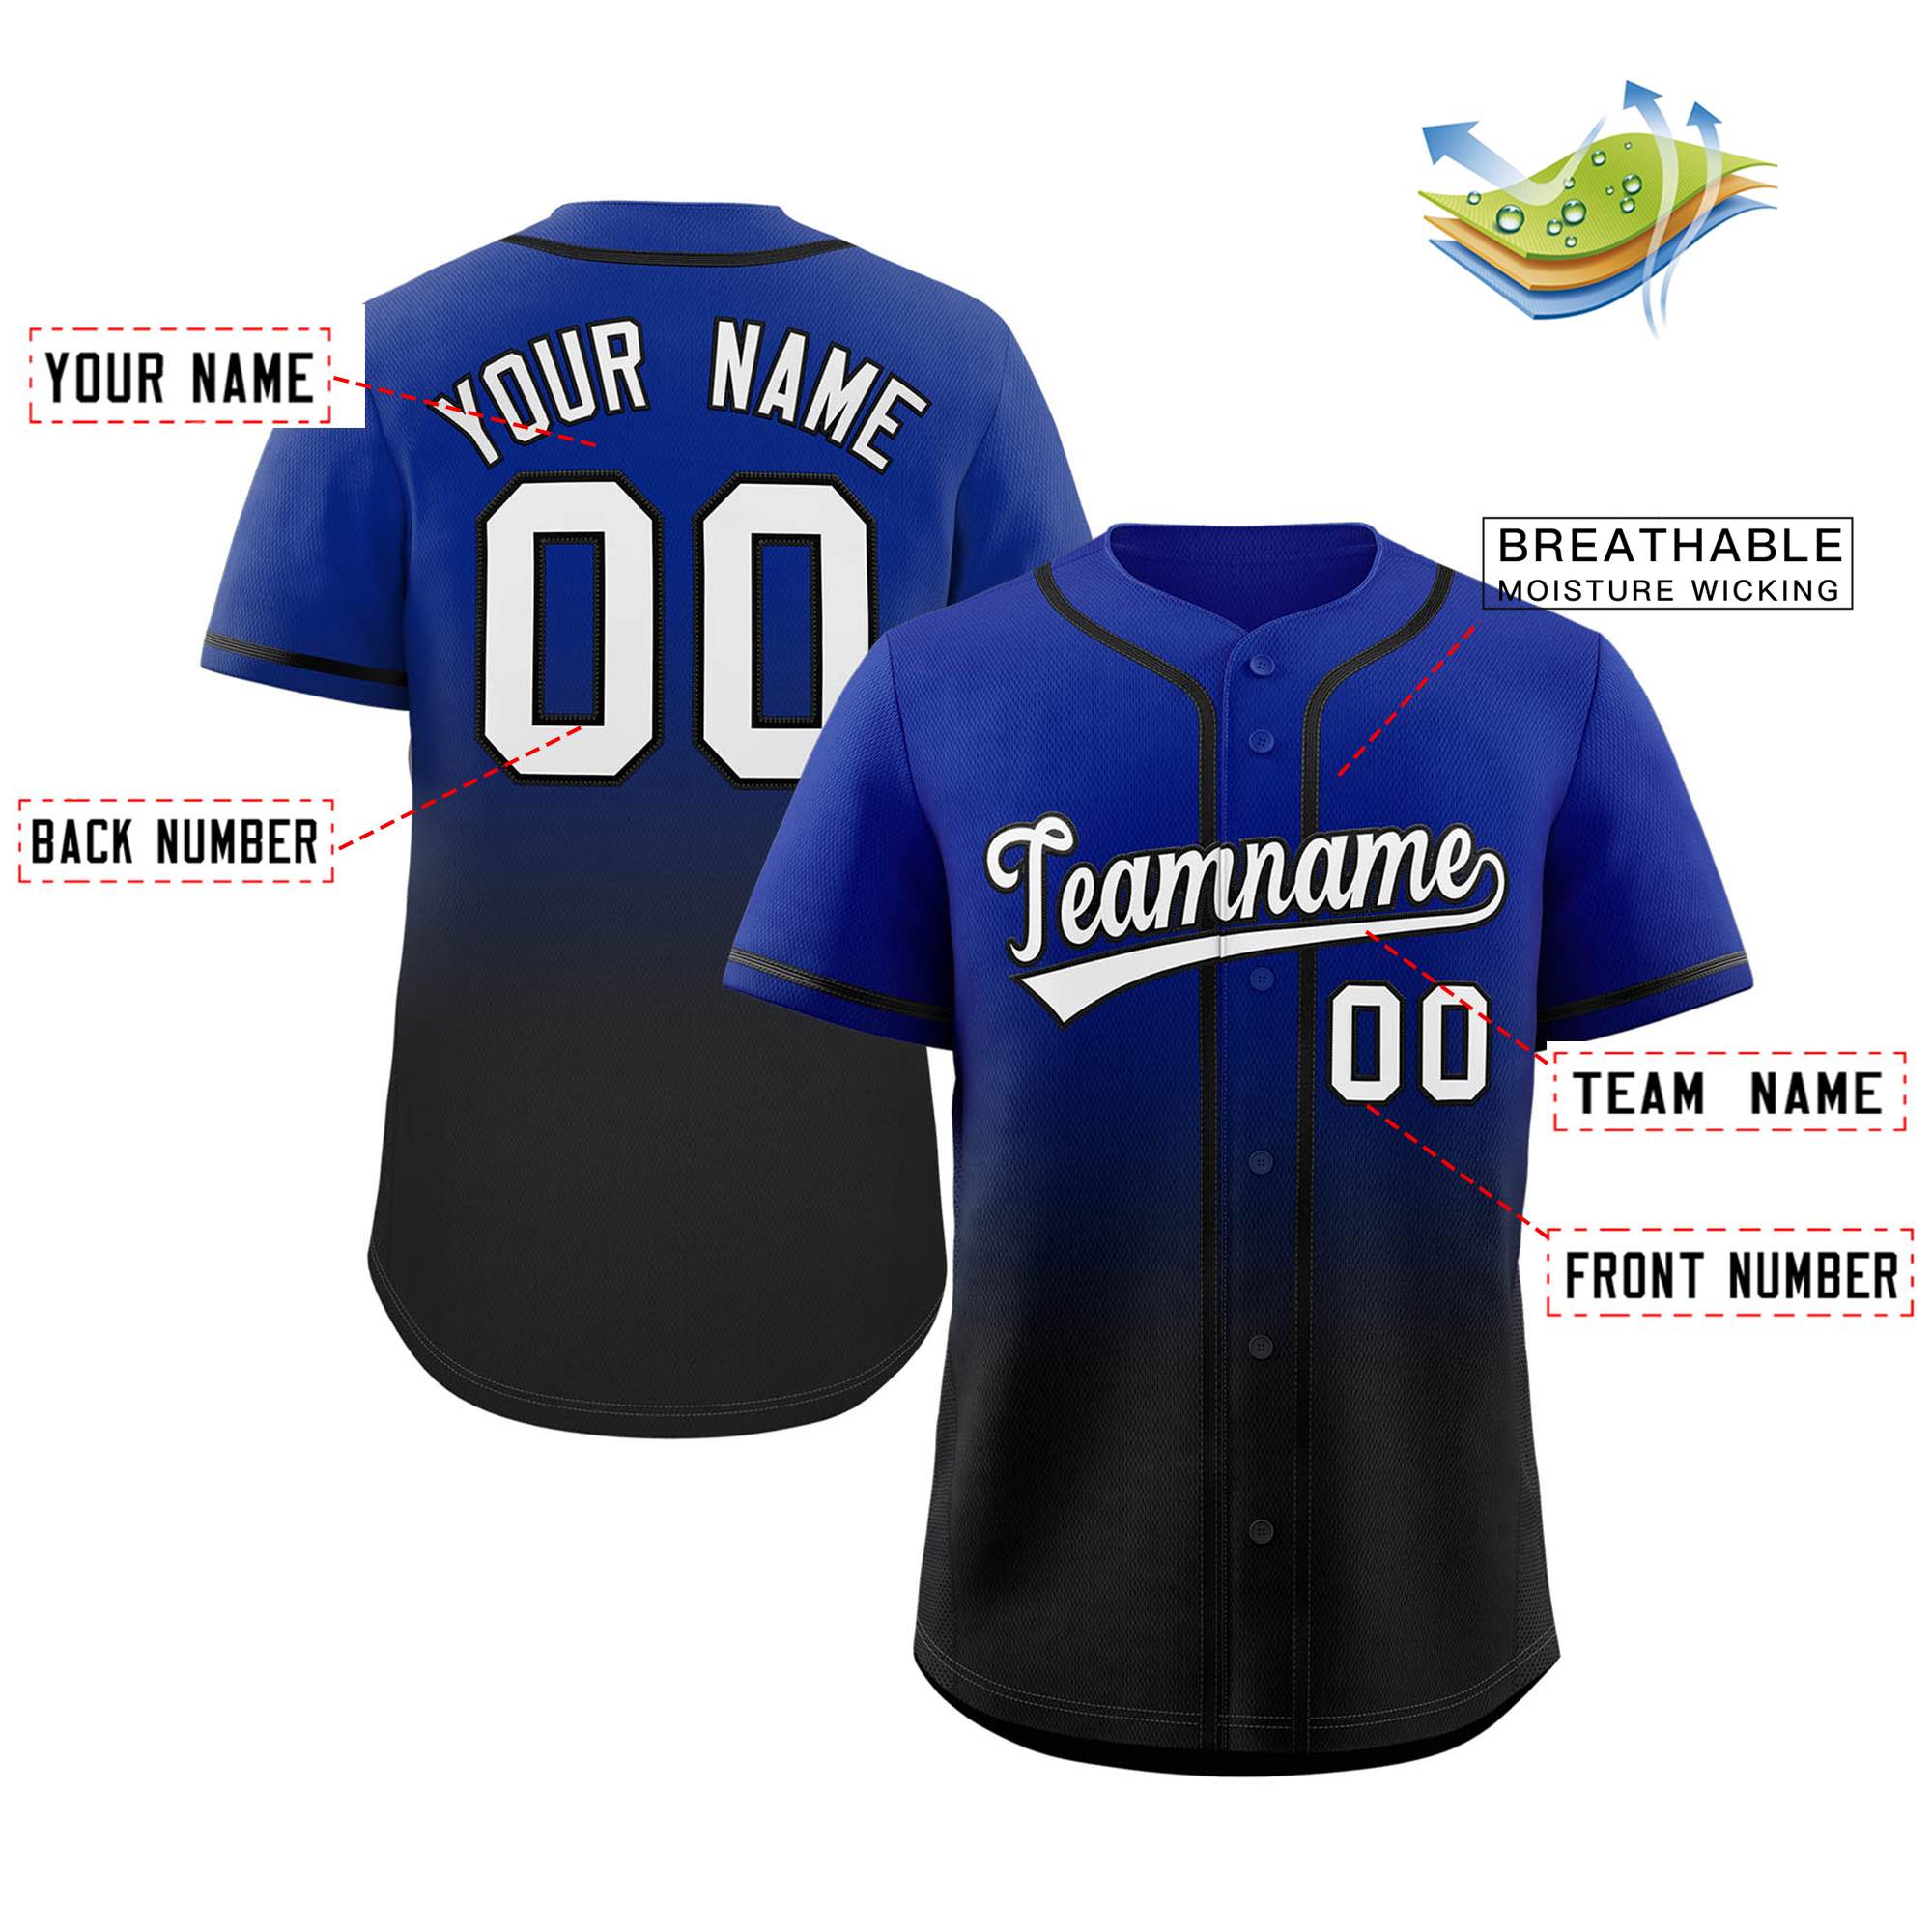 gradient baseball uniforms for adult